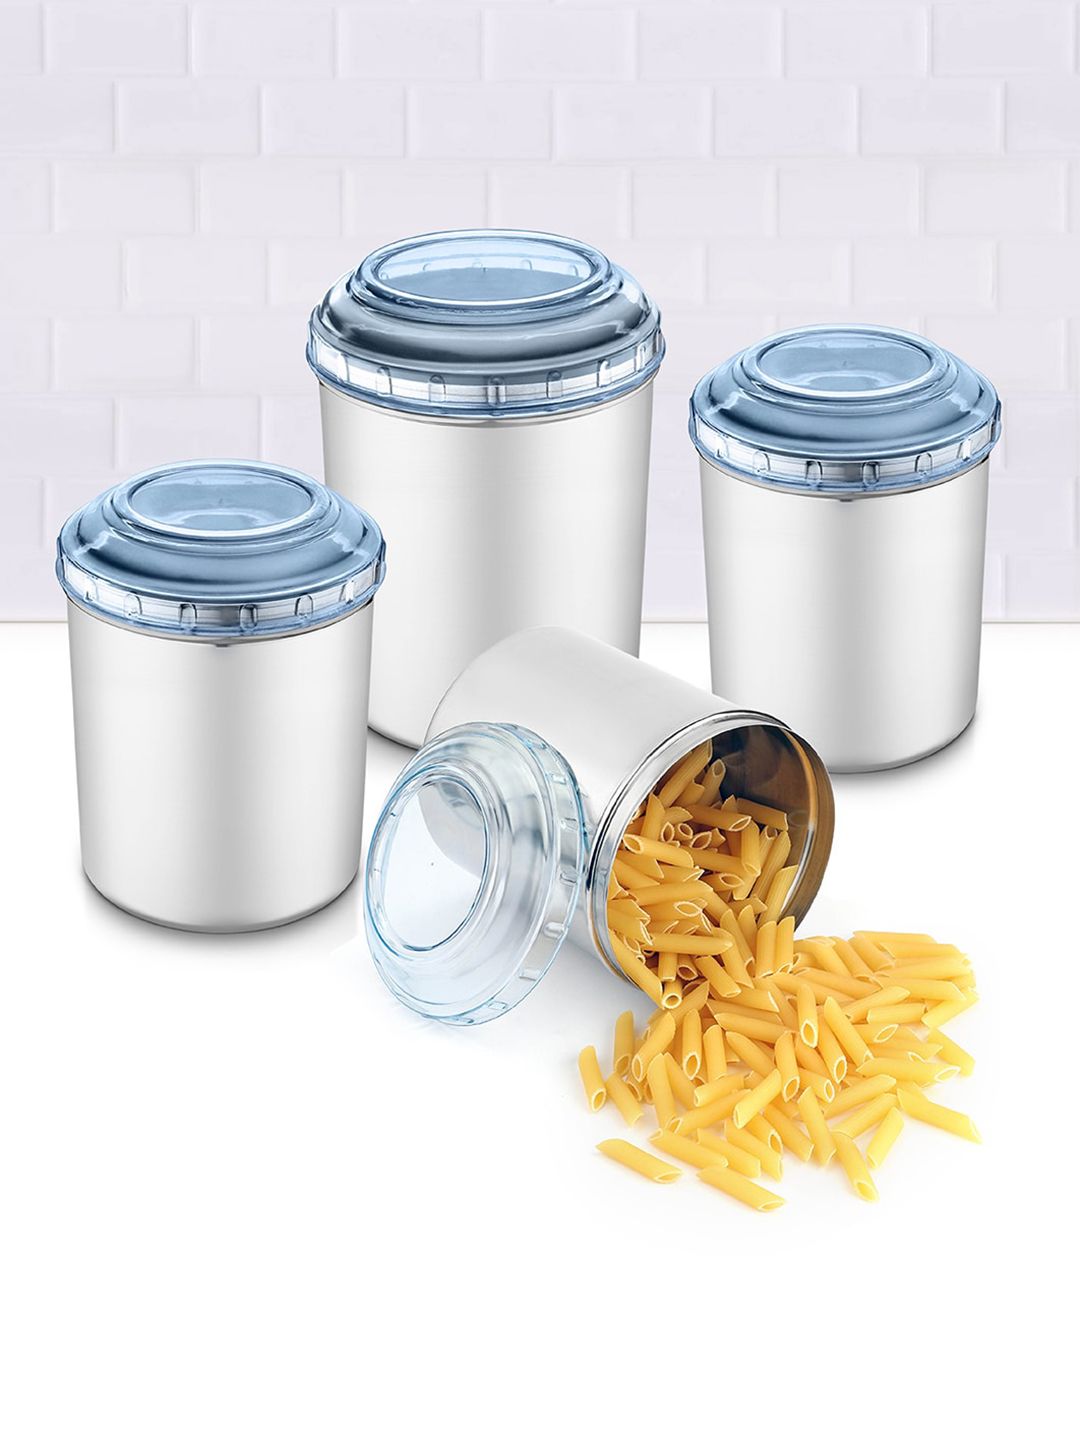 Jensons Set Of 8 Solid Stainless Steel Canisters Price in India